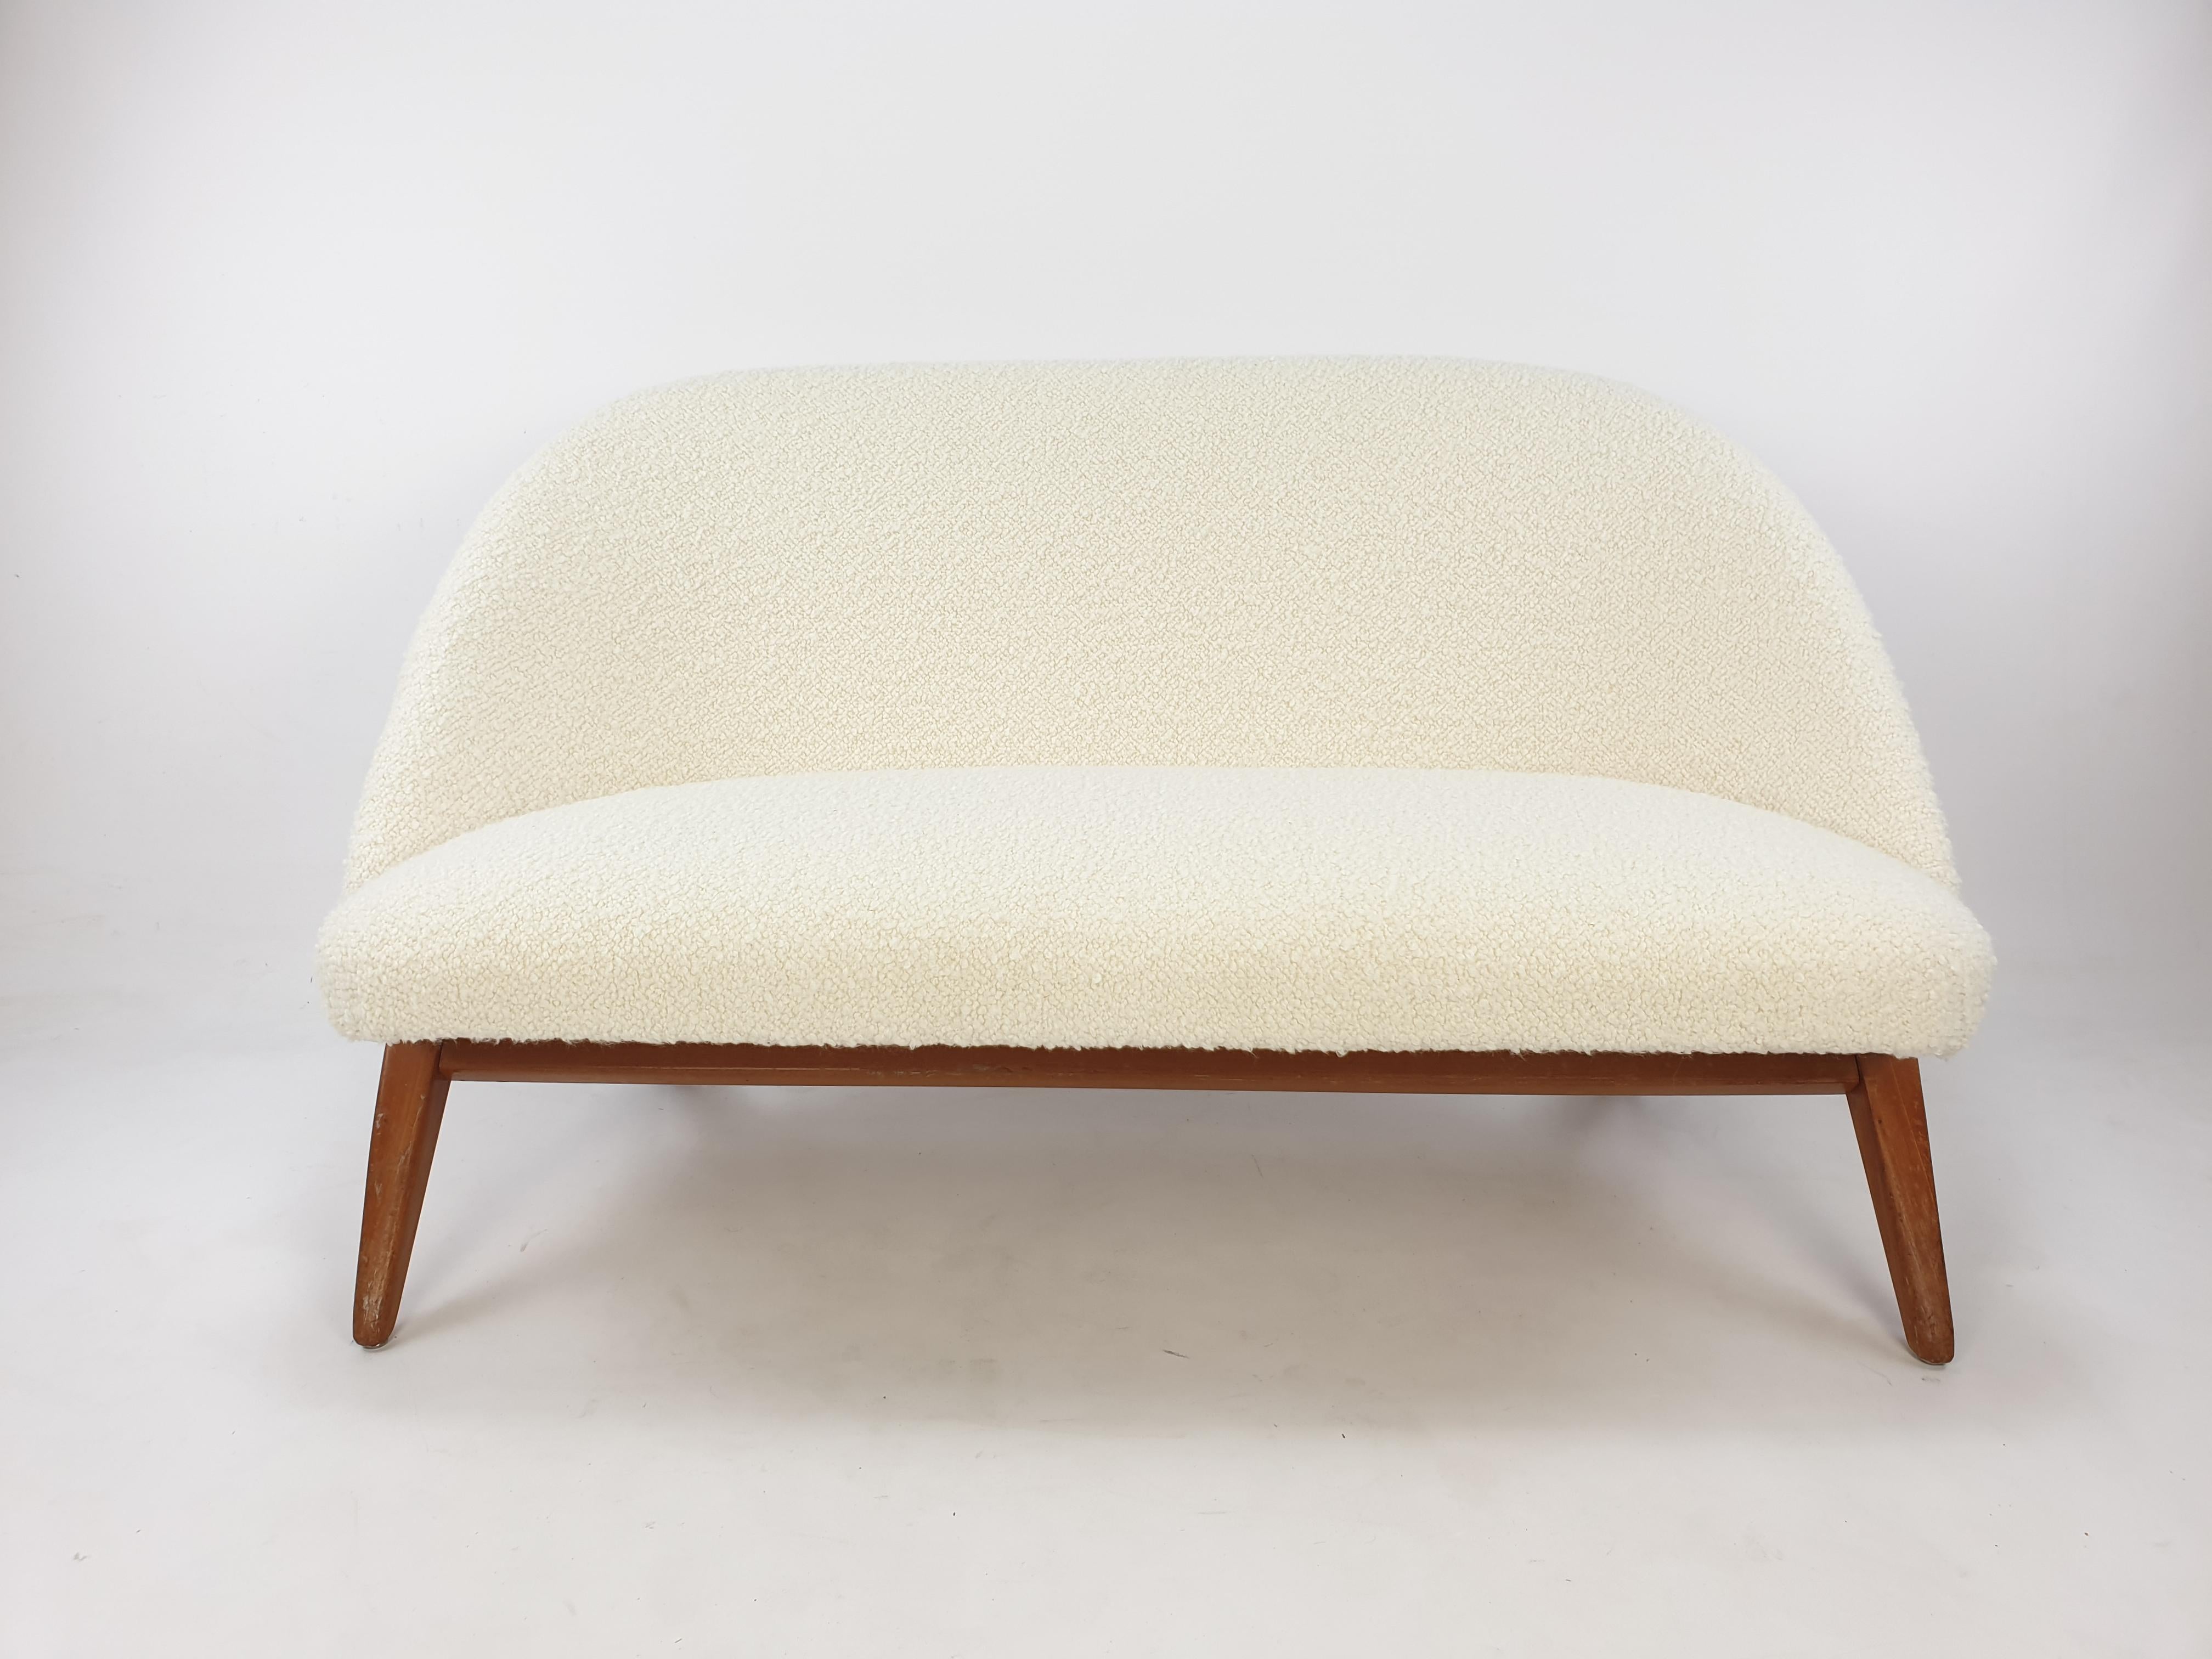 Stunning Mid-Century Modern 2-seat sofa, designed by Theo Ruth for Artifort in the 50s.

The back and the seater are 2 separate pieces that easily fits together and makes it a comfortable sofa.
The sofa is restored with lovely bouclé fabric and new